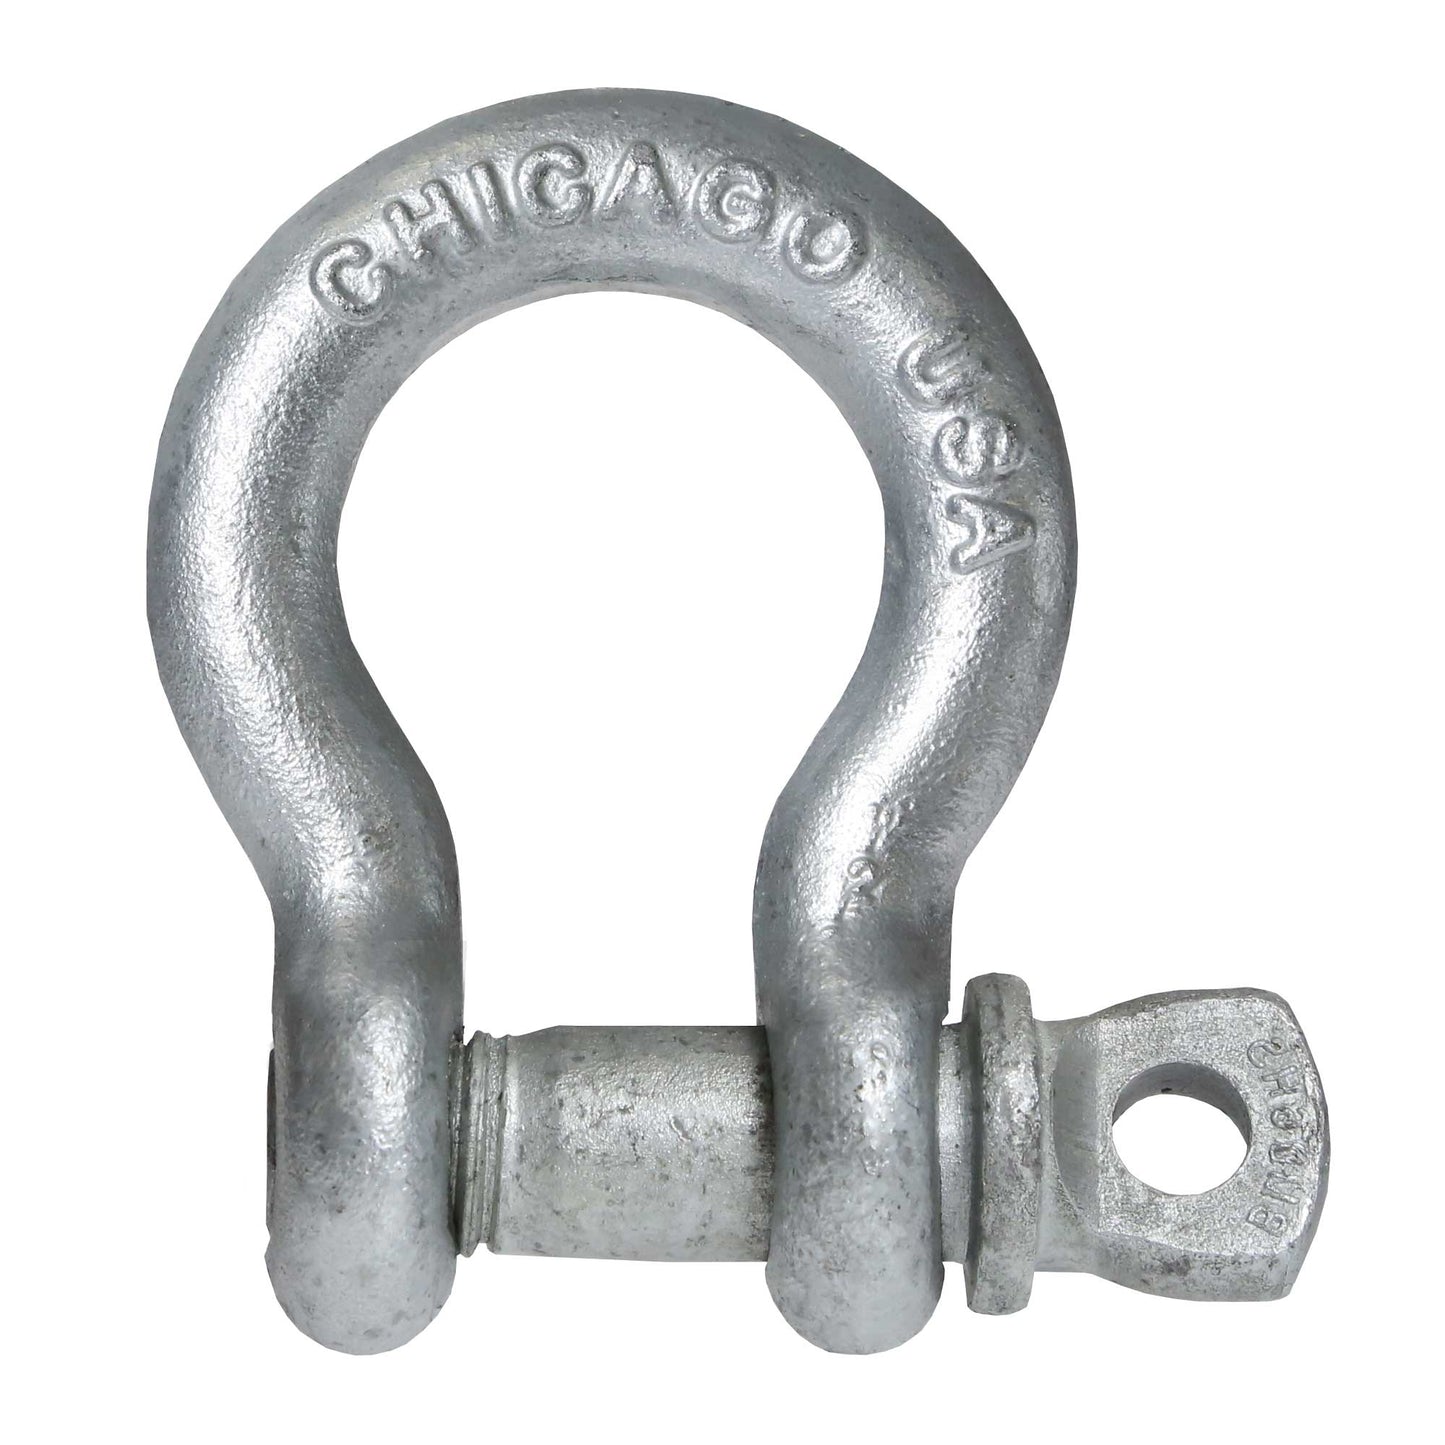 Screw Pin Anchor Shackle - Chicago Hardware - 1/2" Galvanized Steel - 2 Ton primary image